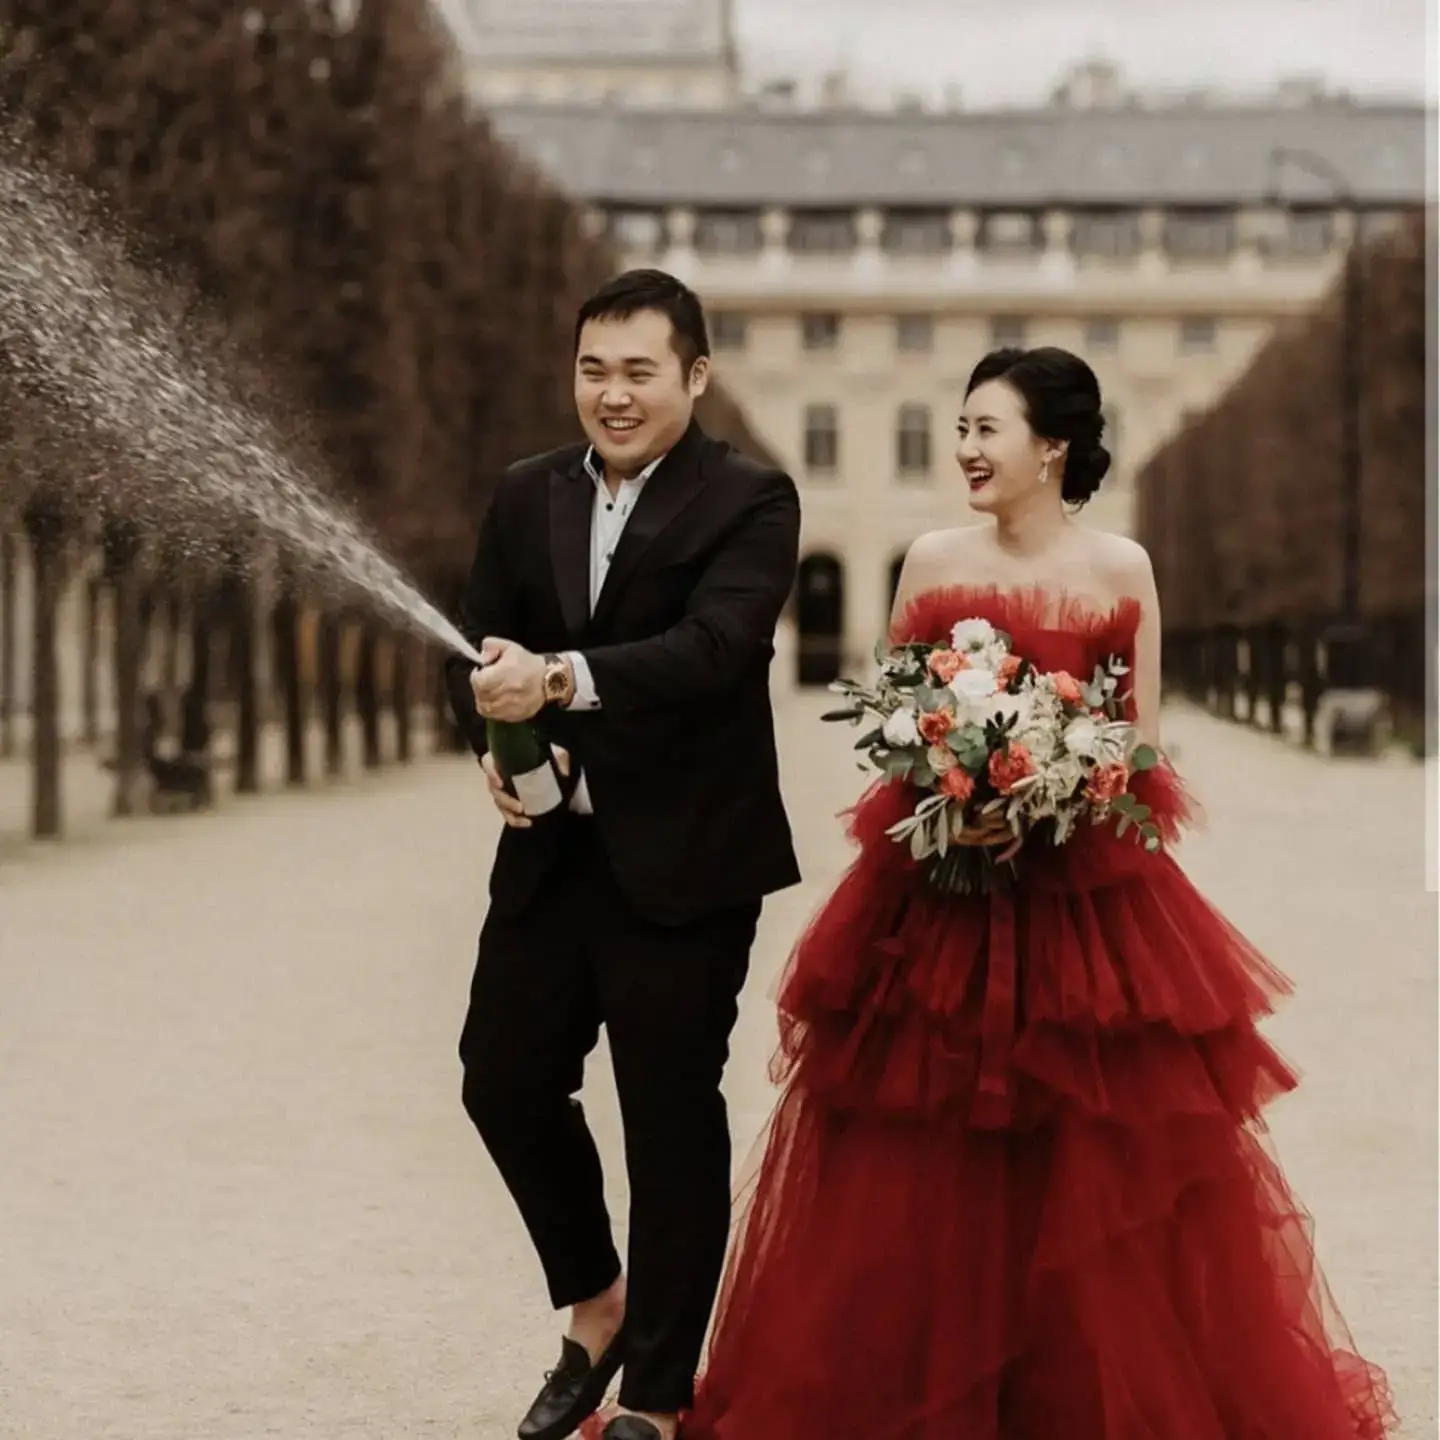 bride in tulle red dress with white pink and red bouquet and groom in black suit